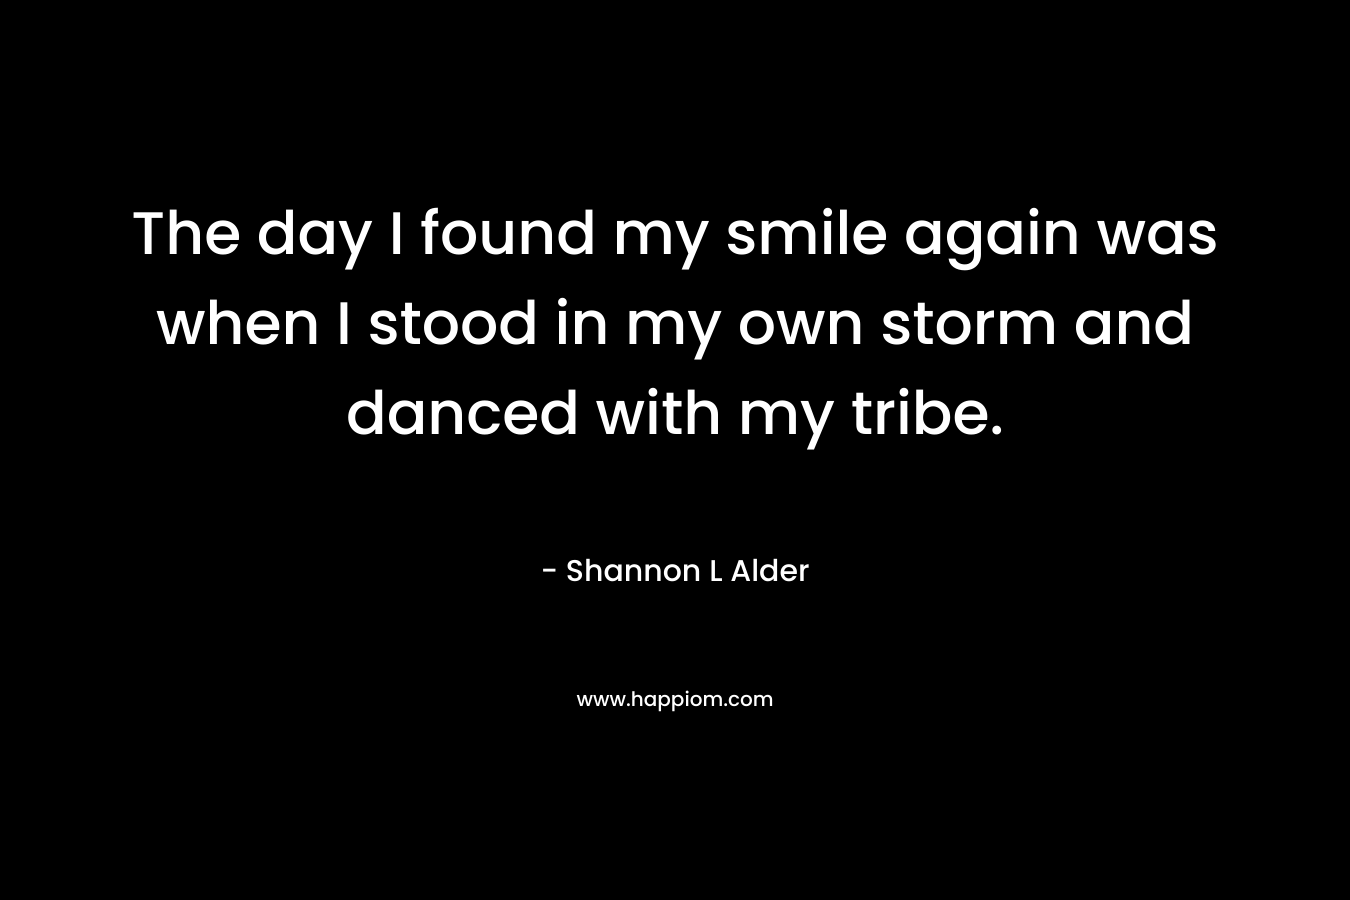 The day I found my smile again was when I stood in my own storm and danced with my tribe. – Shannon L Alder